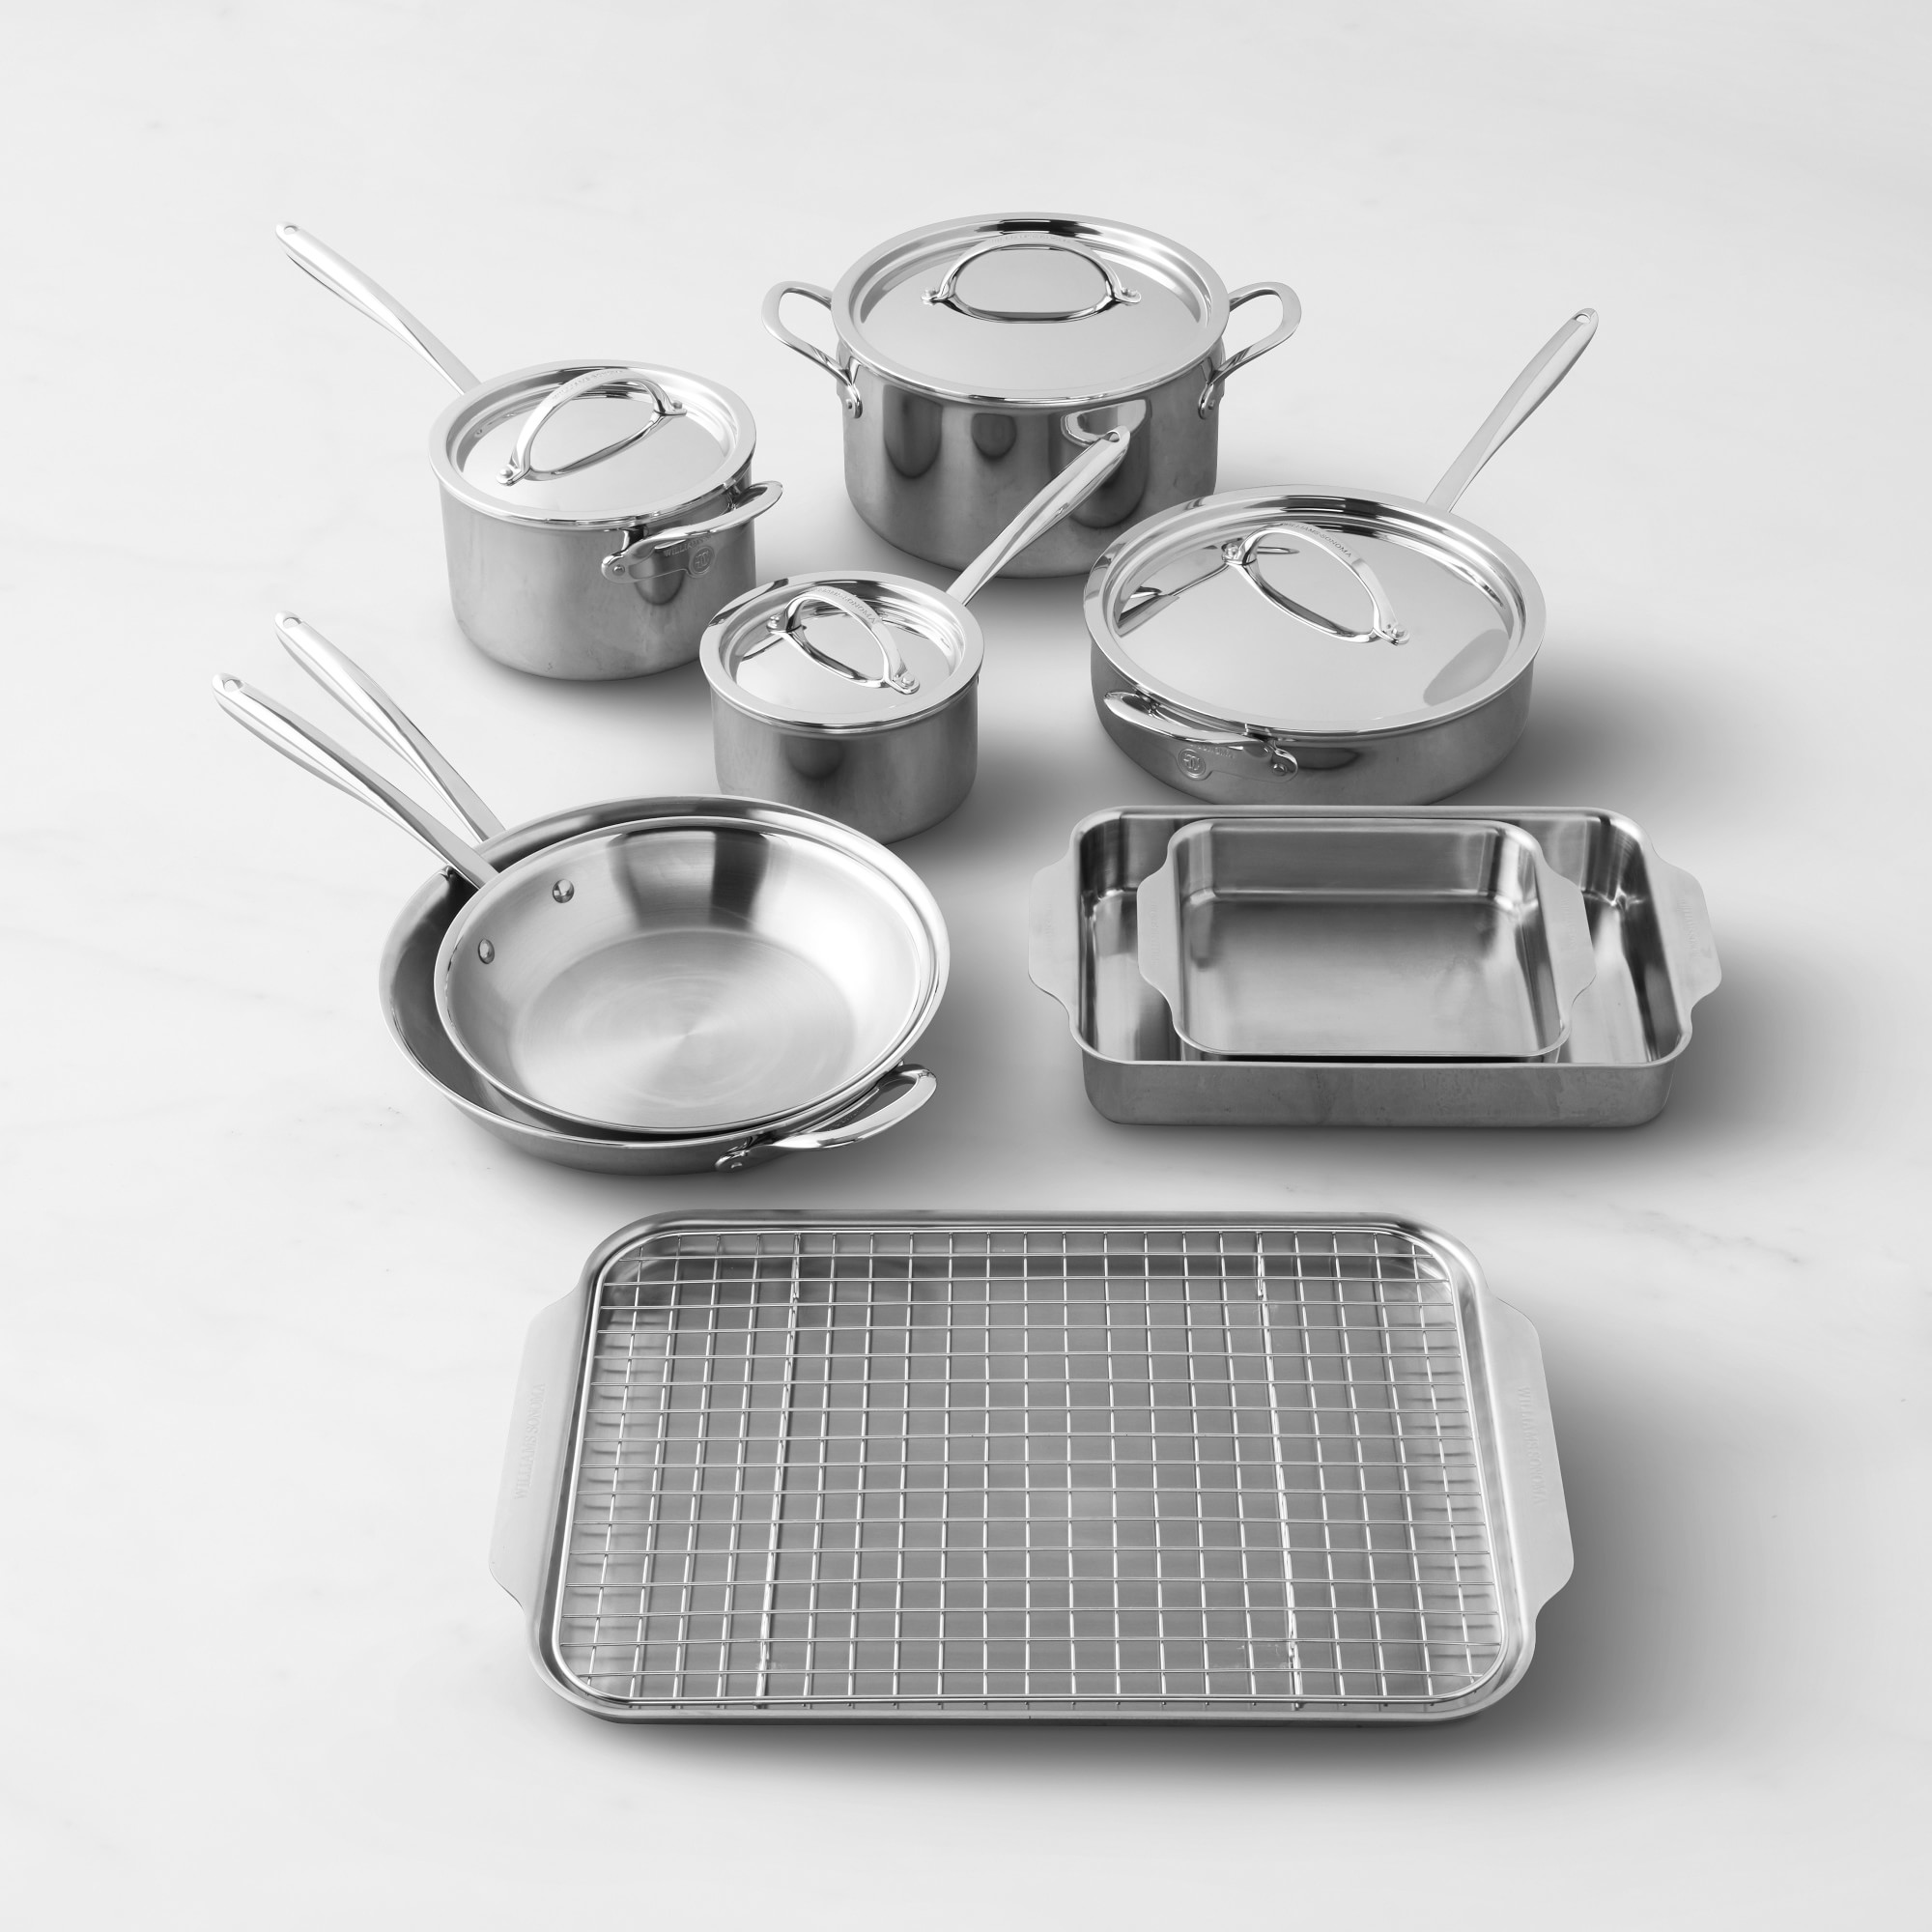 Williams Sonoma Thermo-Clad Stainless Steel -Piece Ultimate Cookware and Ovenware Set